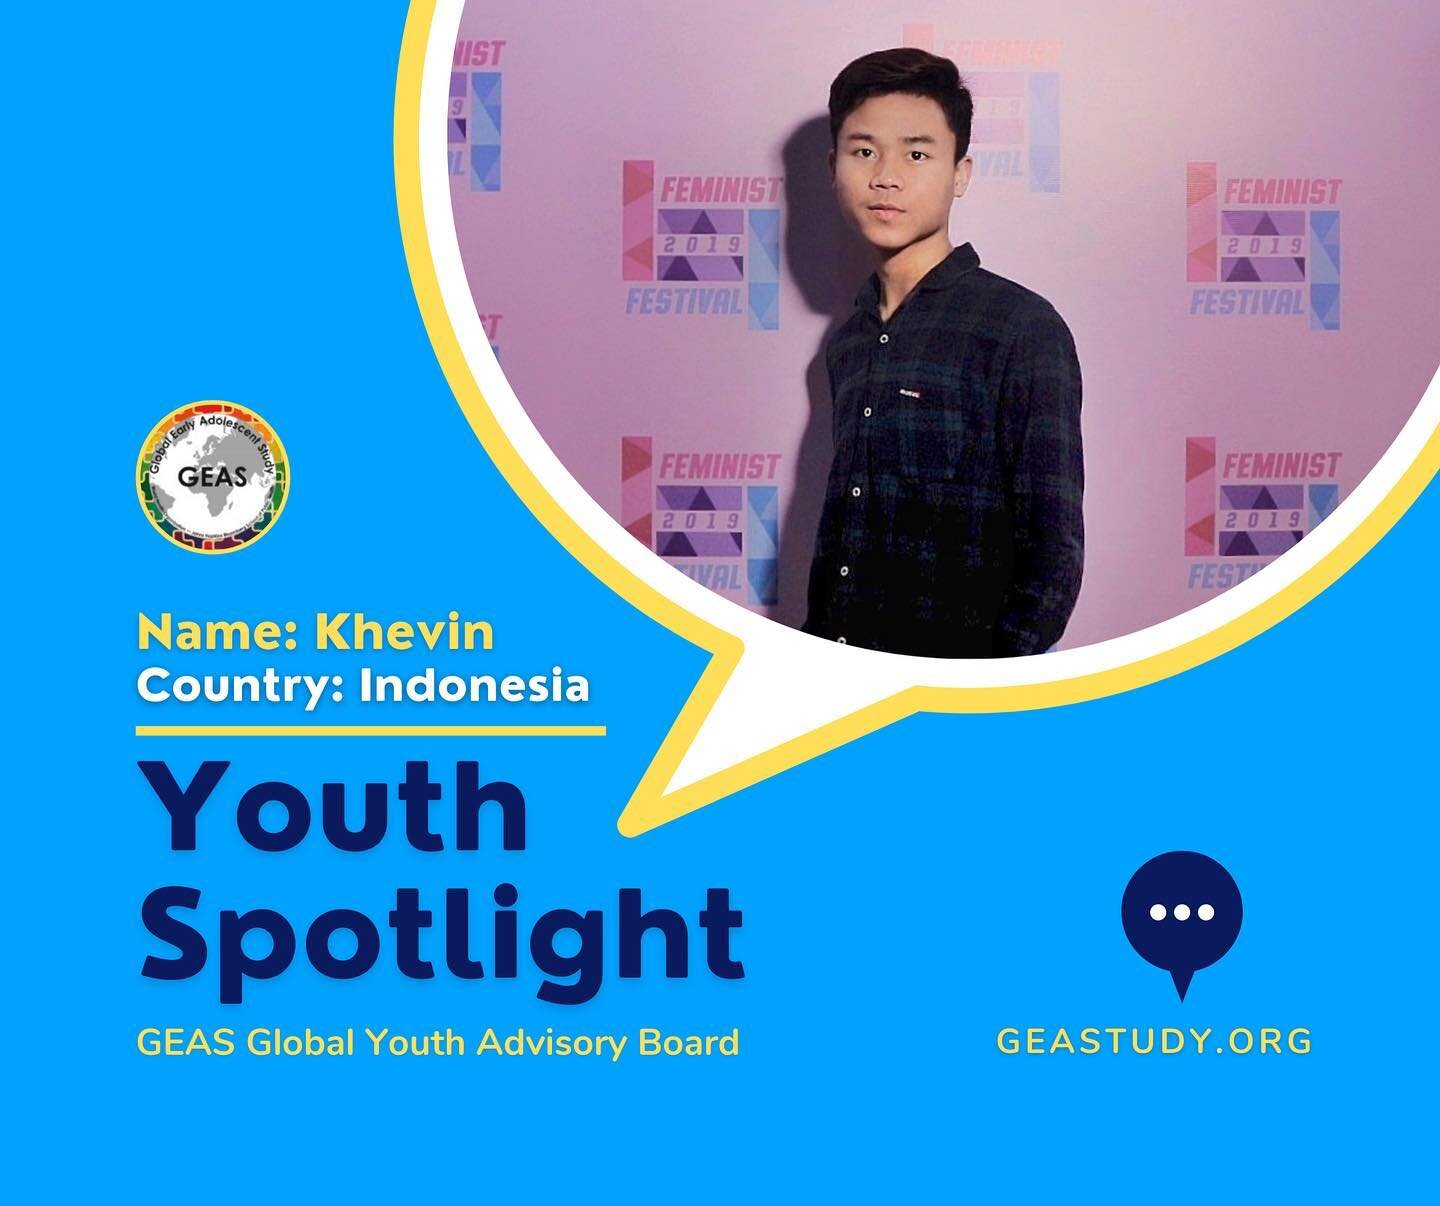 We spoke with Khevin (@khevinthtp), one of our Global Youth Advisory Board members from Indonesia, and asked him a few questions about why he wanted to join a youth board, who inspires him, and more.

Read youth news at GEAStudy.org 
LINK IN BIO

#yo